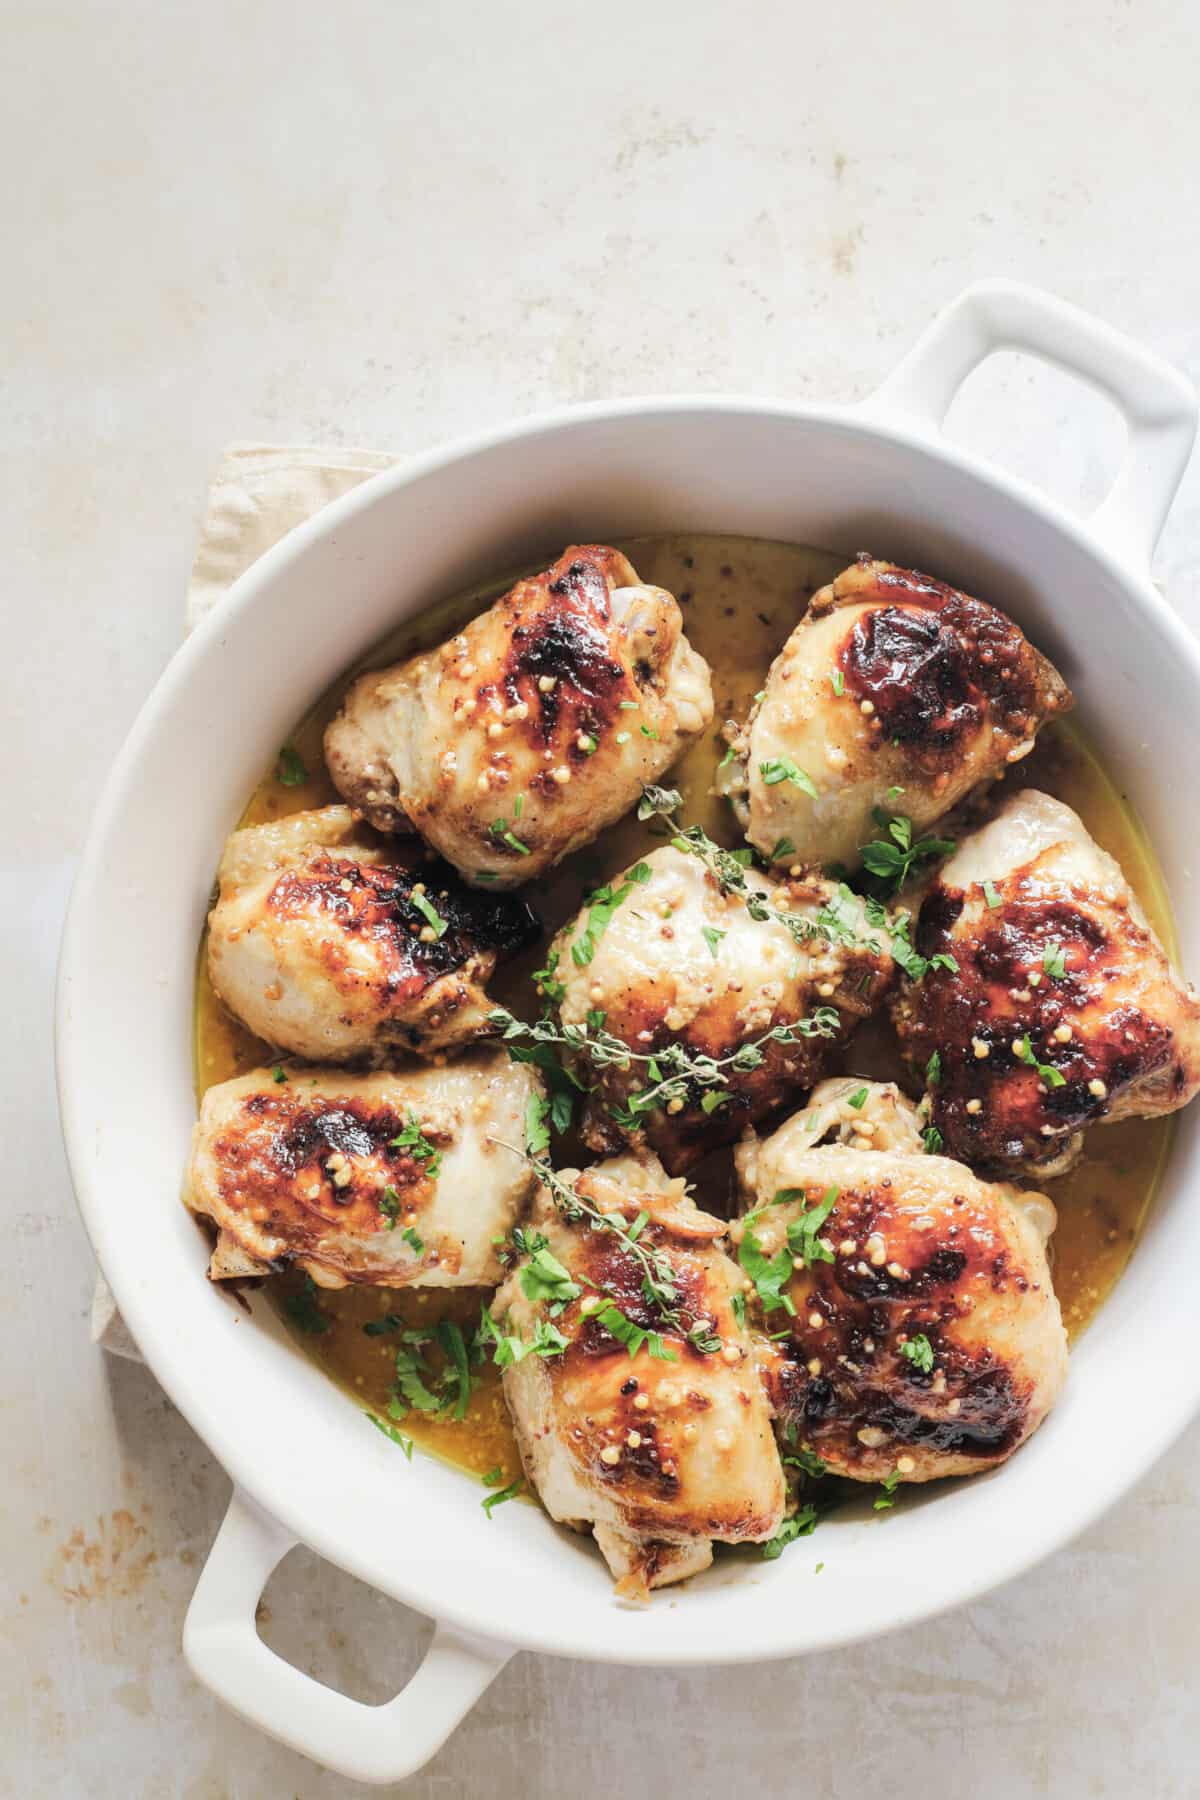 Eight roasted chicken thighs inside of a round baking dish on top of an off-white counter